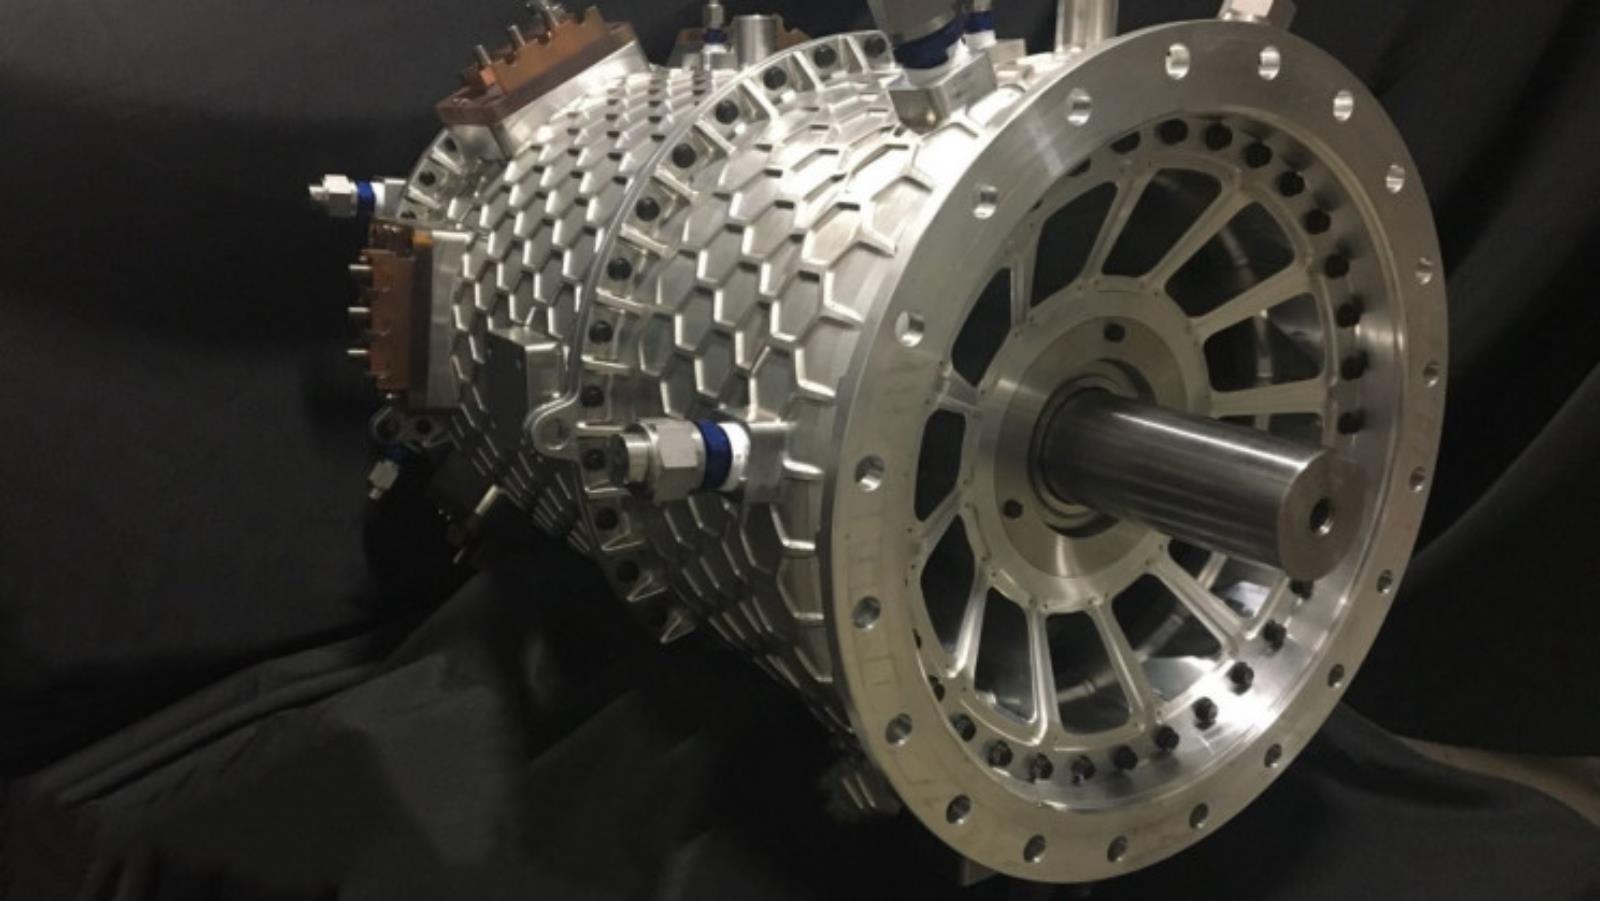 Startup Wright revealed 2 megawatt electric motors for airplanes